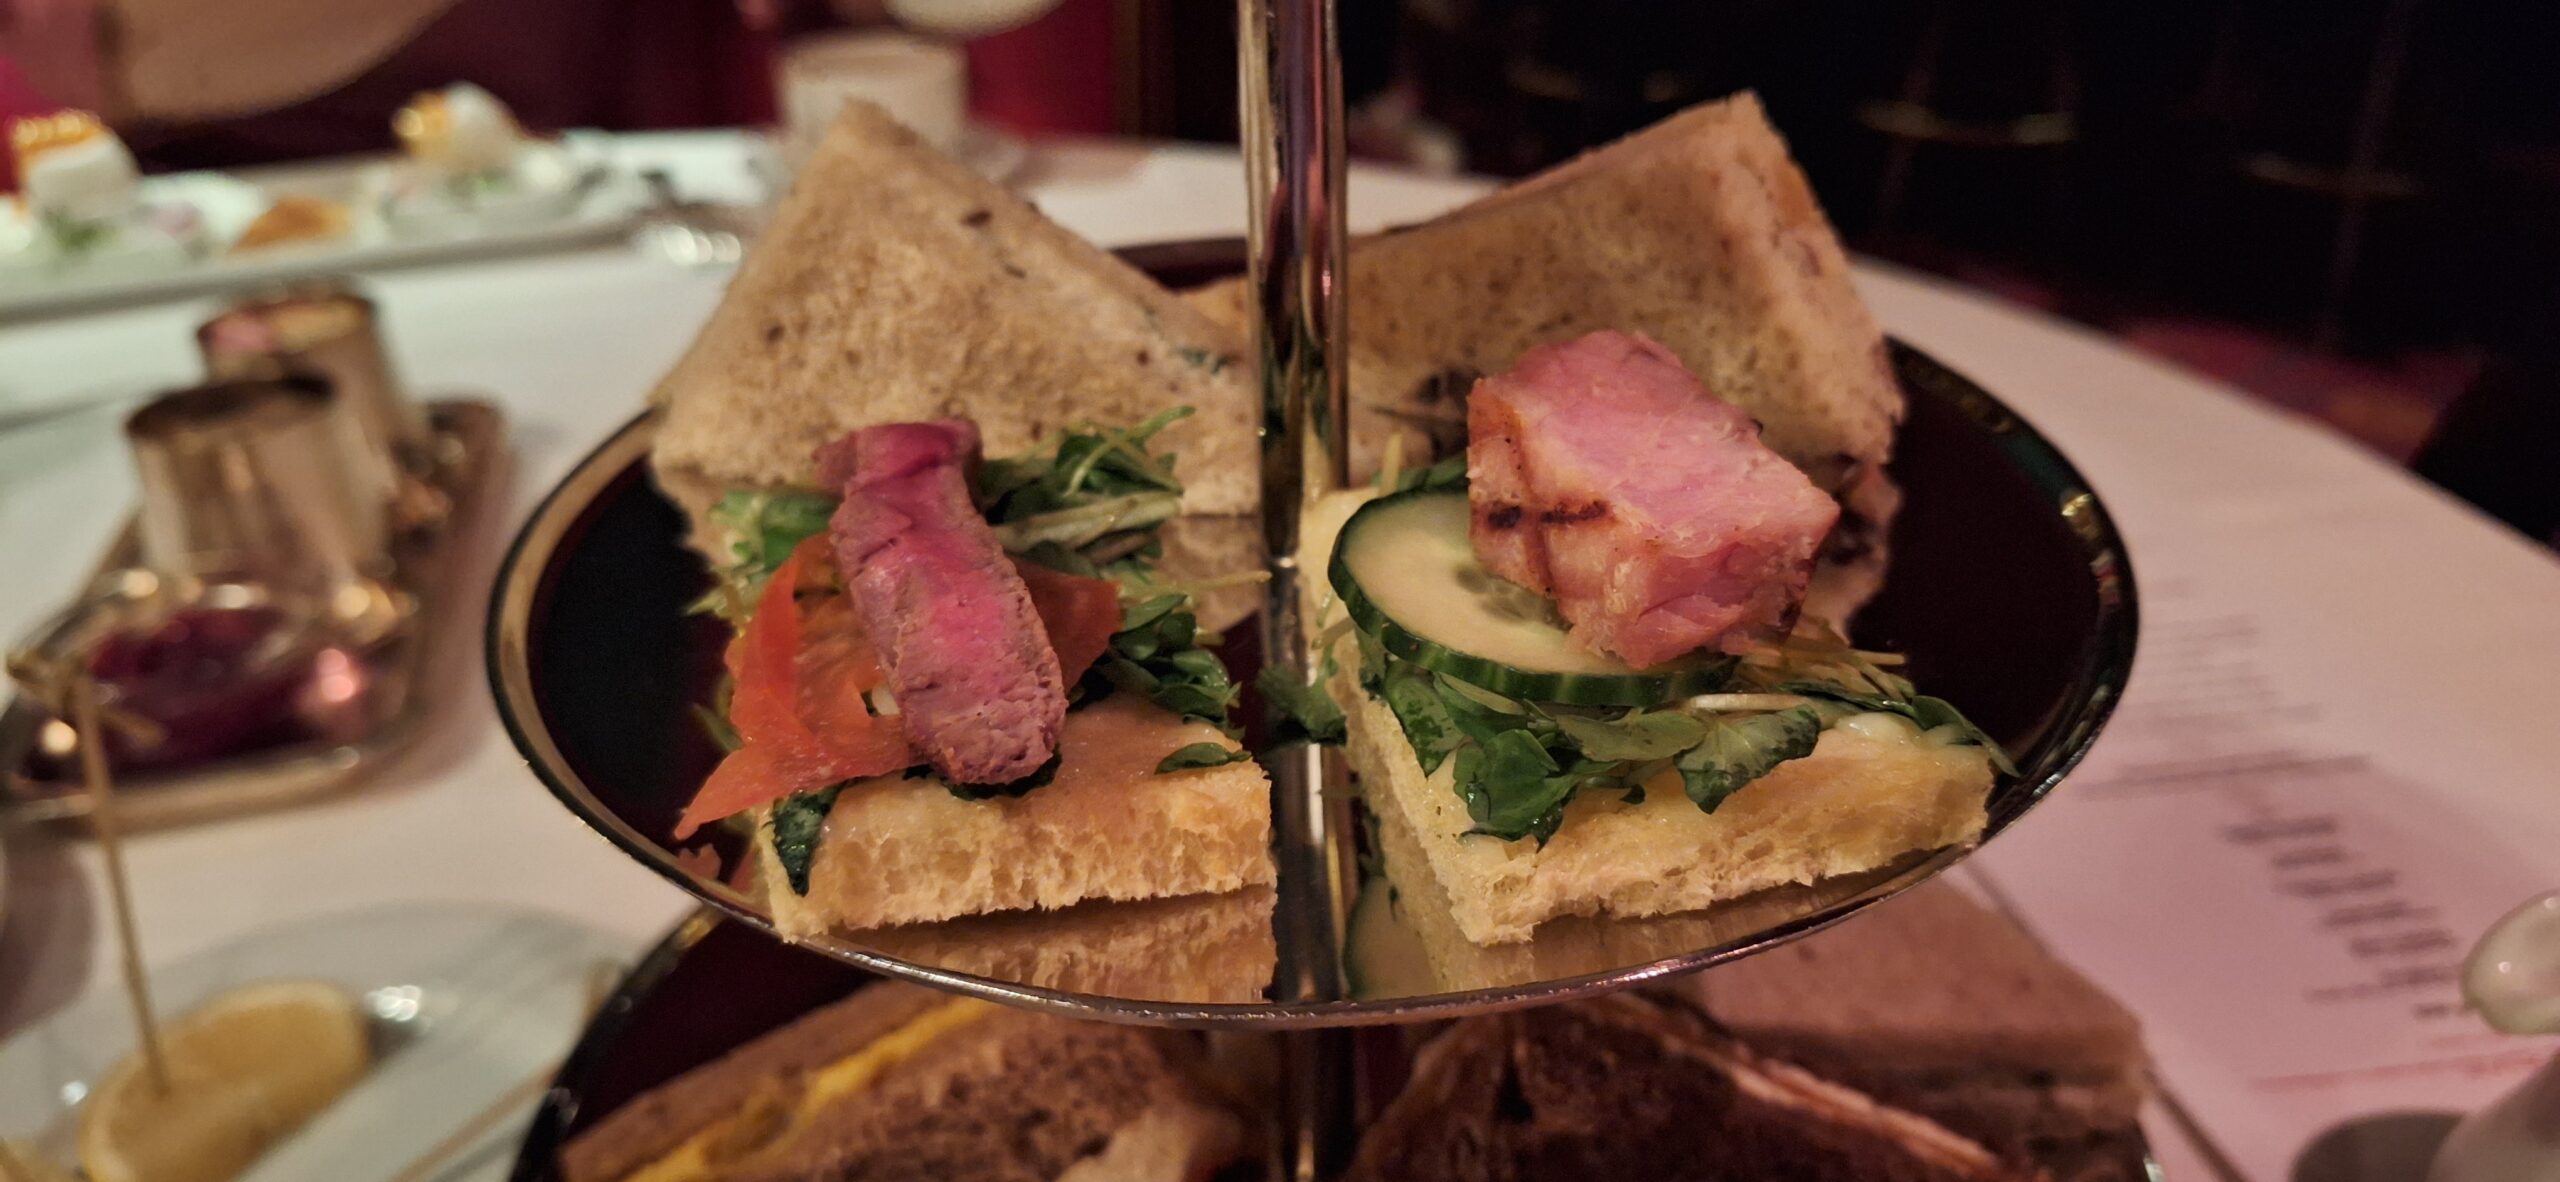 a plate of sandwiches